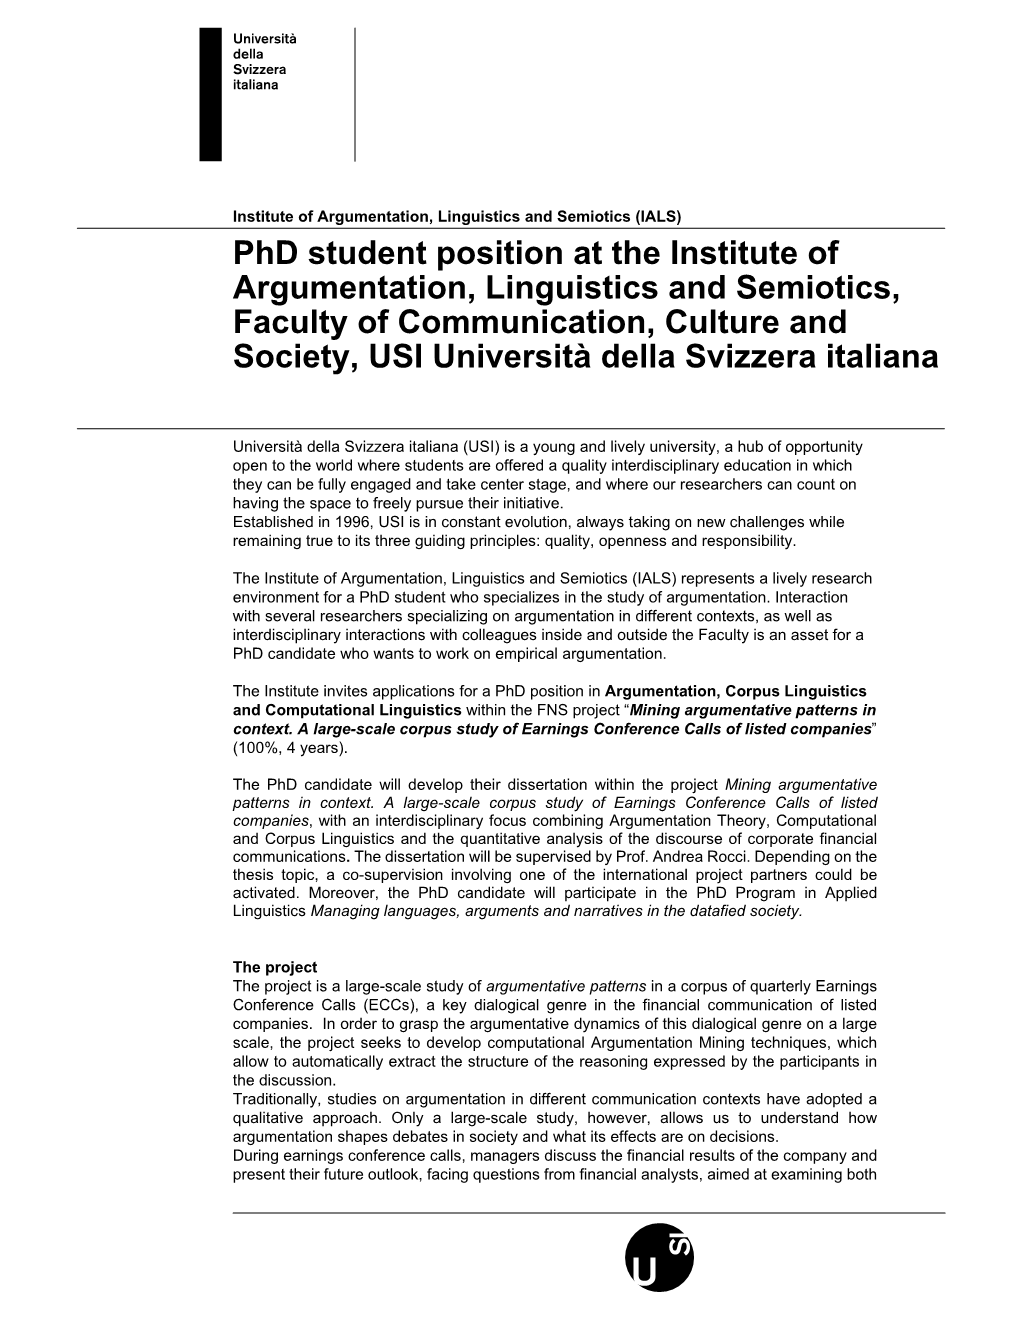 Phd Student Position at the Institute of Argumentation, Linguistics And